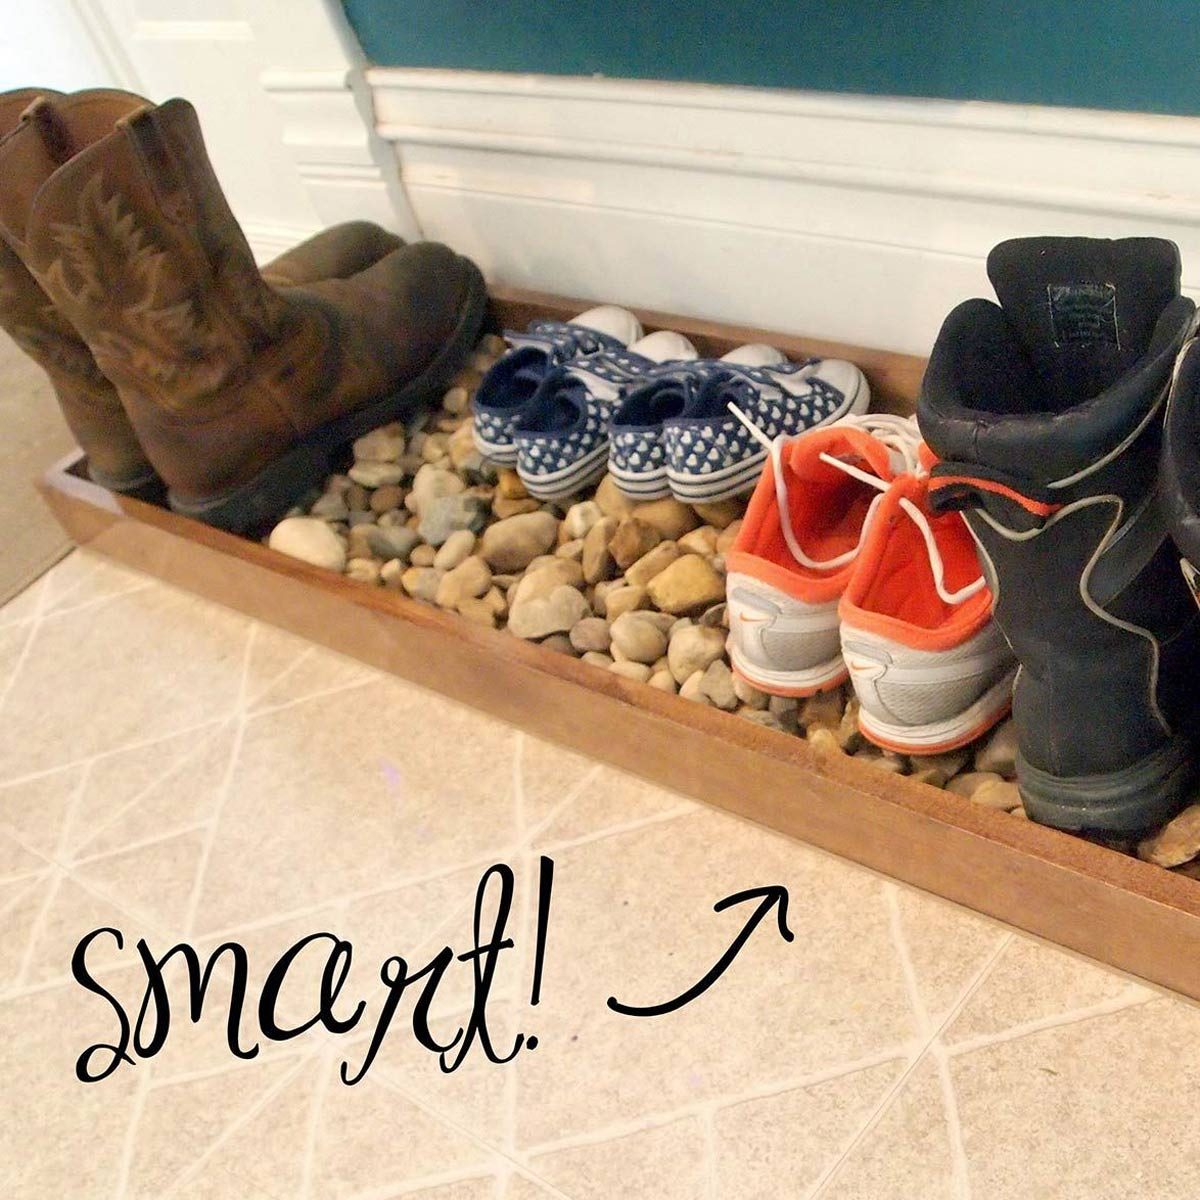 DIY Boot Tray - Home Improvement Projects to inspire and be